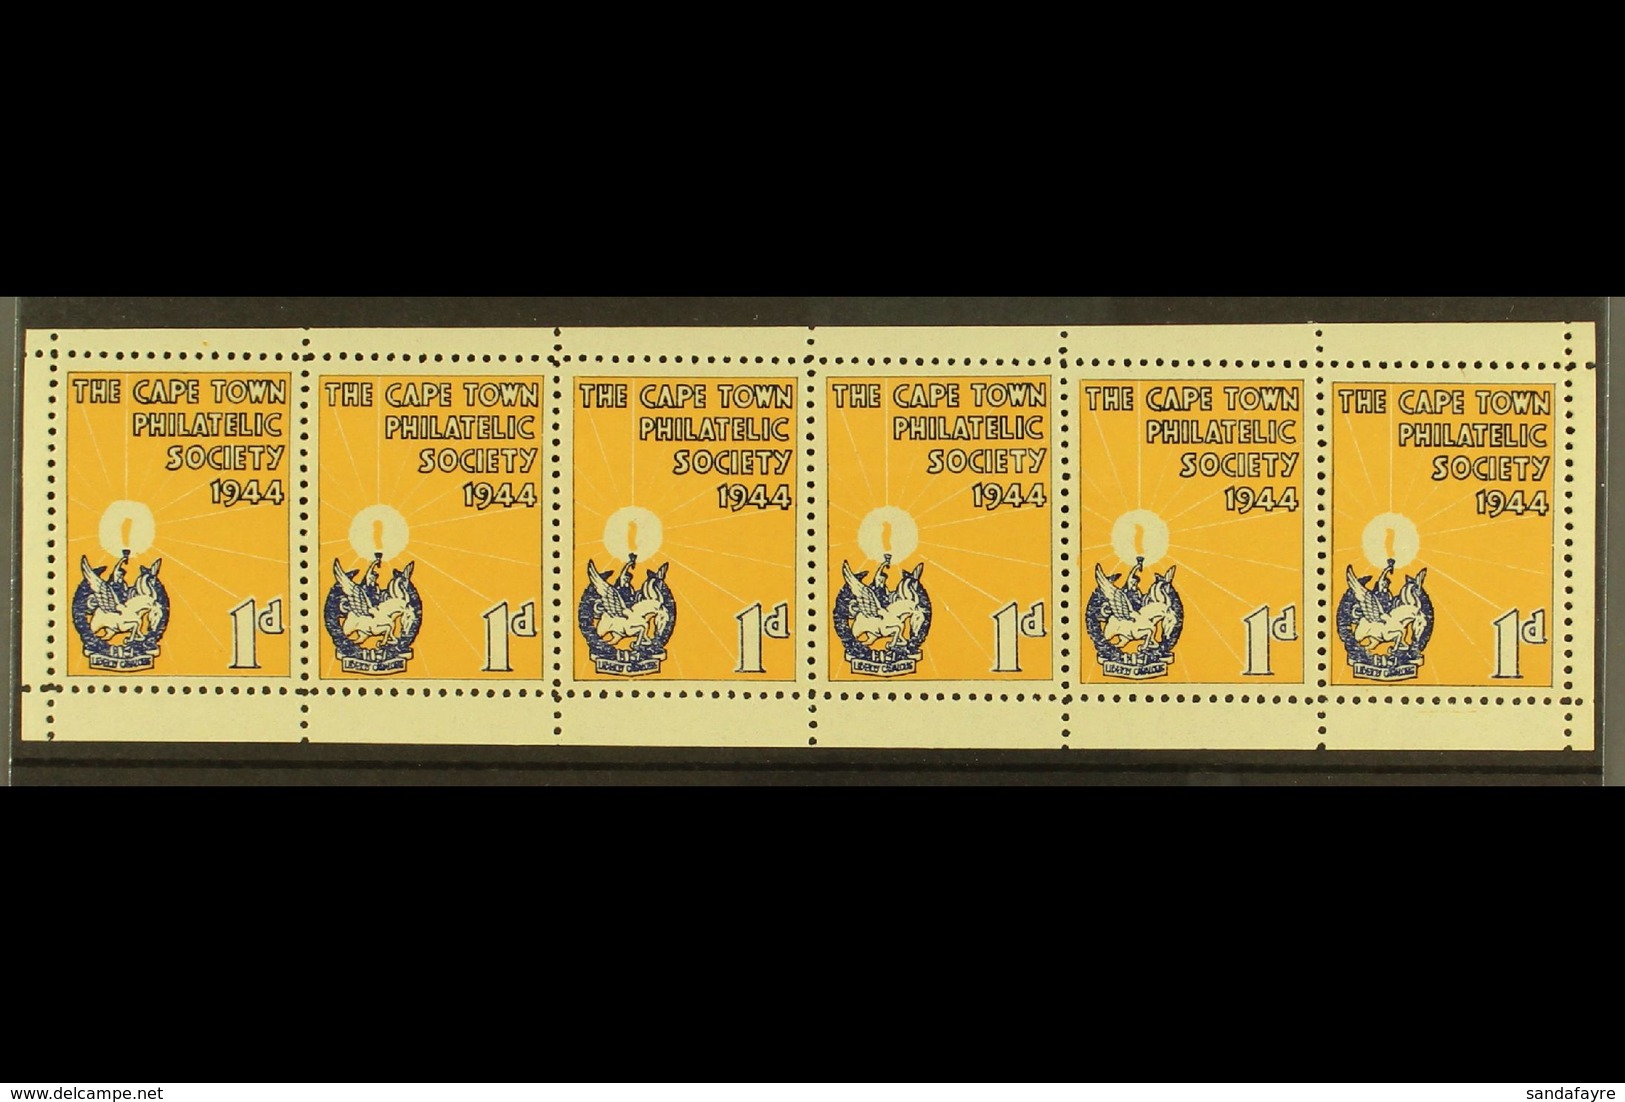 CINDERELLA LABEL 1944 "The Cape Town Philatelic Society" 1d Blue & Buff, Strip Of 6 Labels With Margins All Around, Gumm - Unclassified